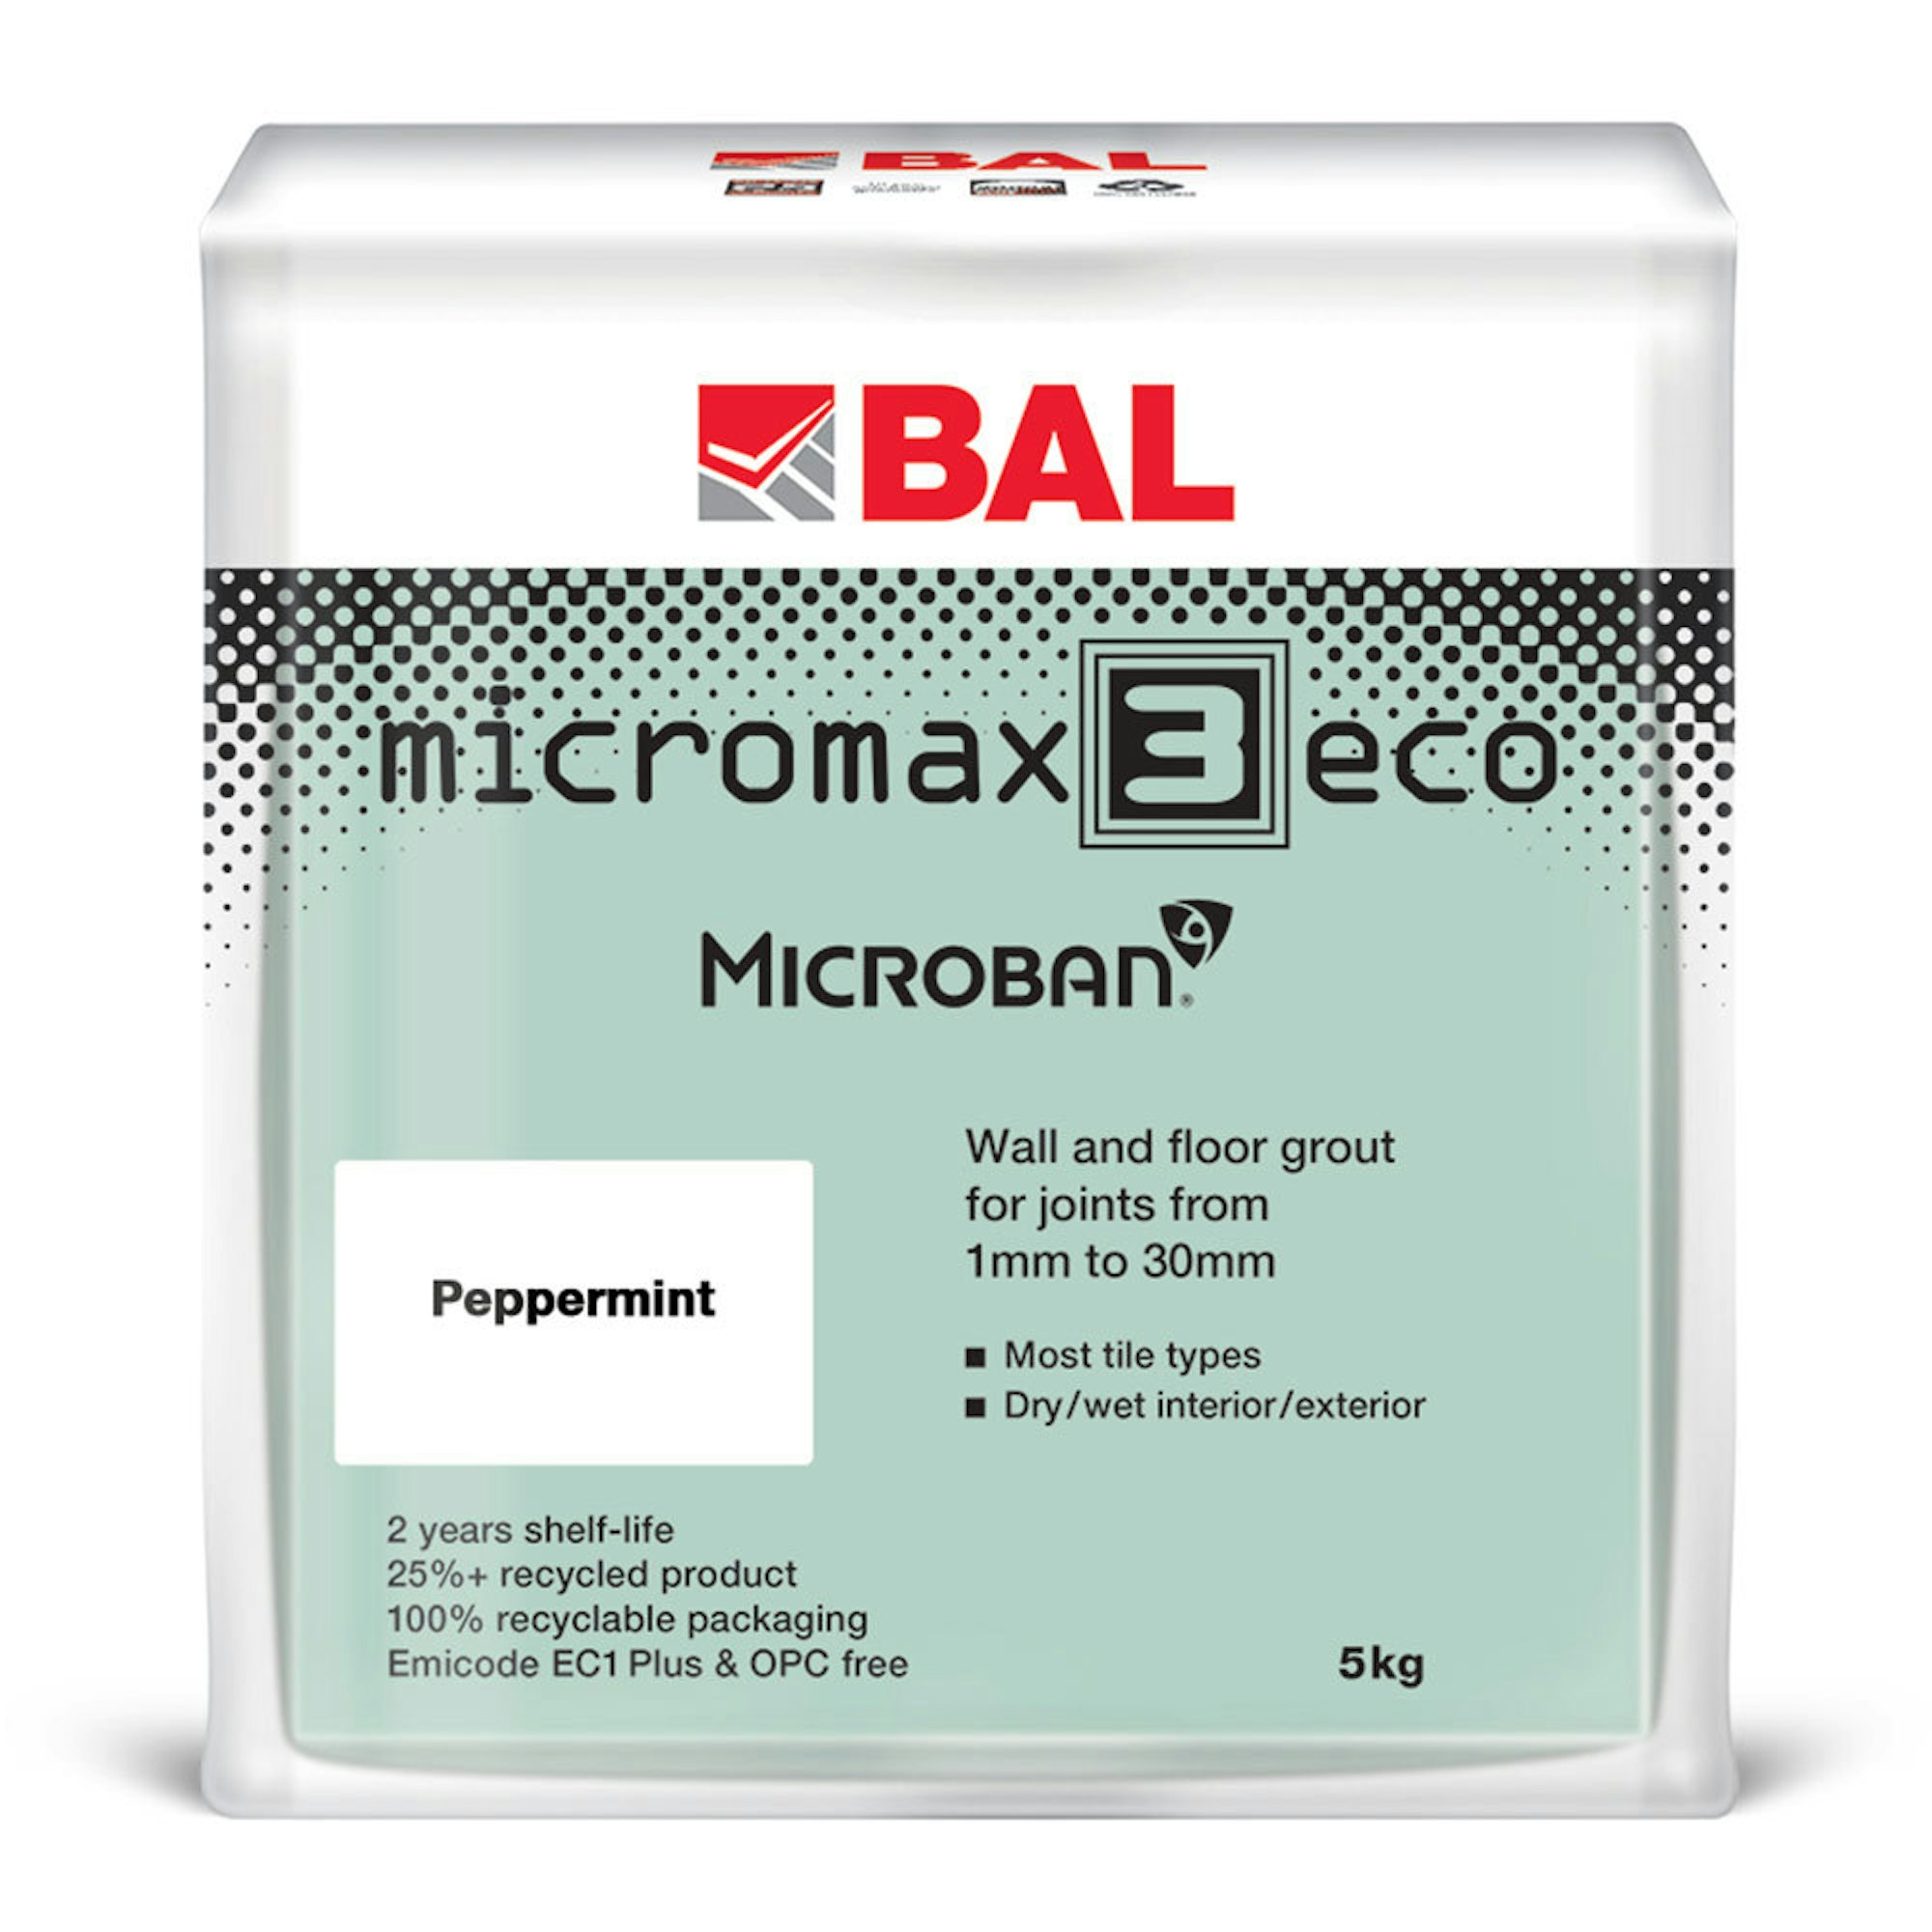 5kg BAL Micromax 3 Eco Peppermint Grout